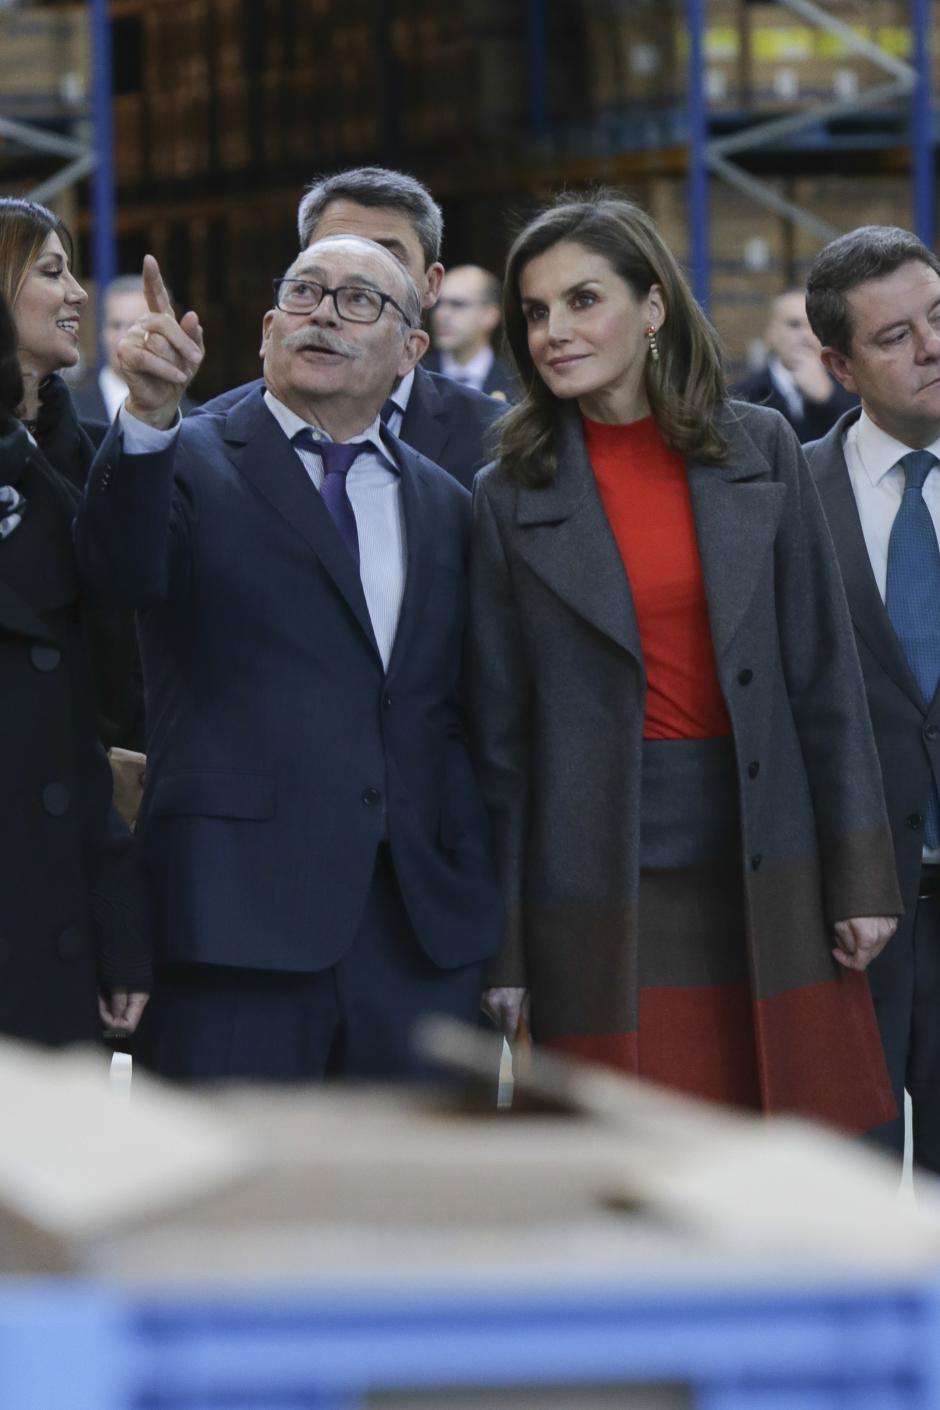 Queen Letizia Ortiz and Fructuoso Lopez during visit to “ Joma Sports “ headquarter in Toledo on Friday 19 January 2018